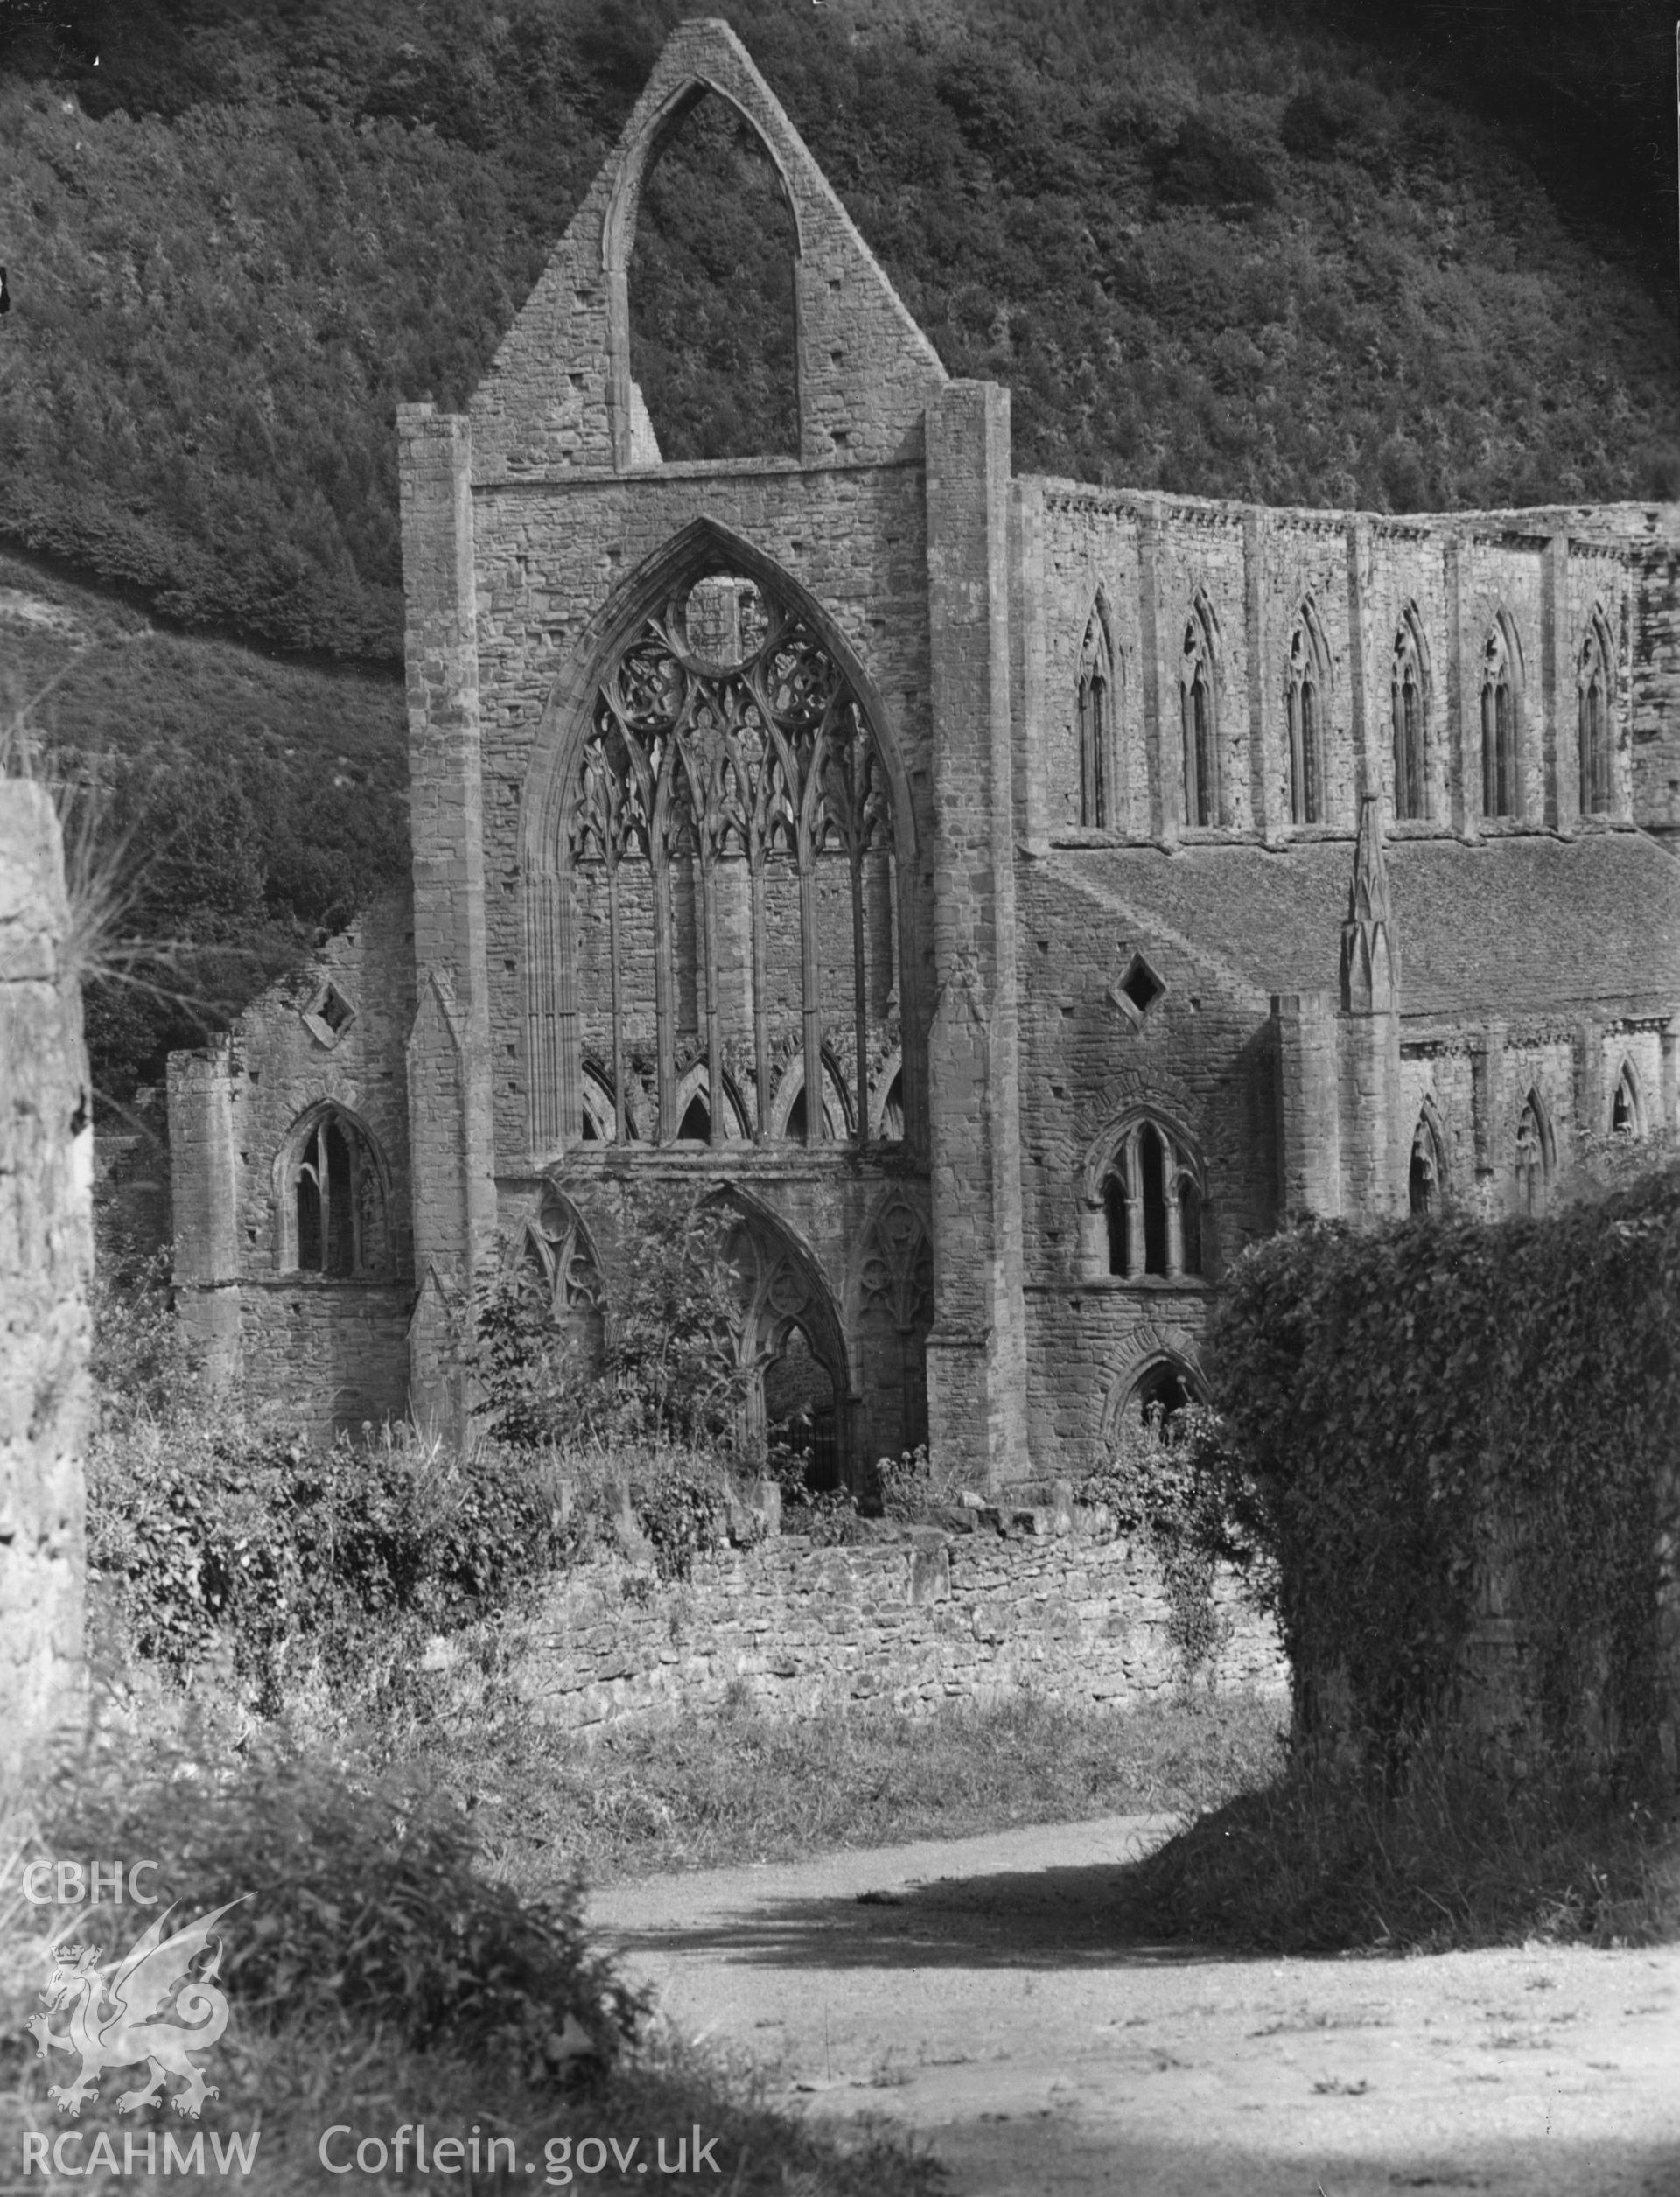 Digital copy of a view of the west front of Tintern Abbey taken by Shirley Jones, dated 1944.